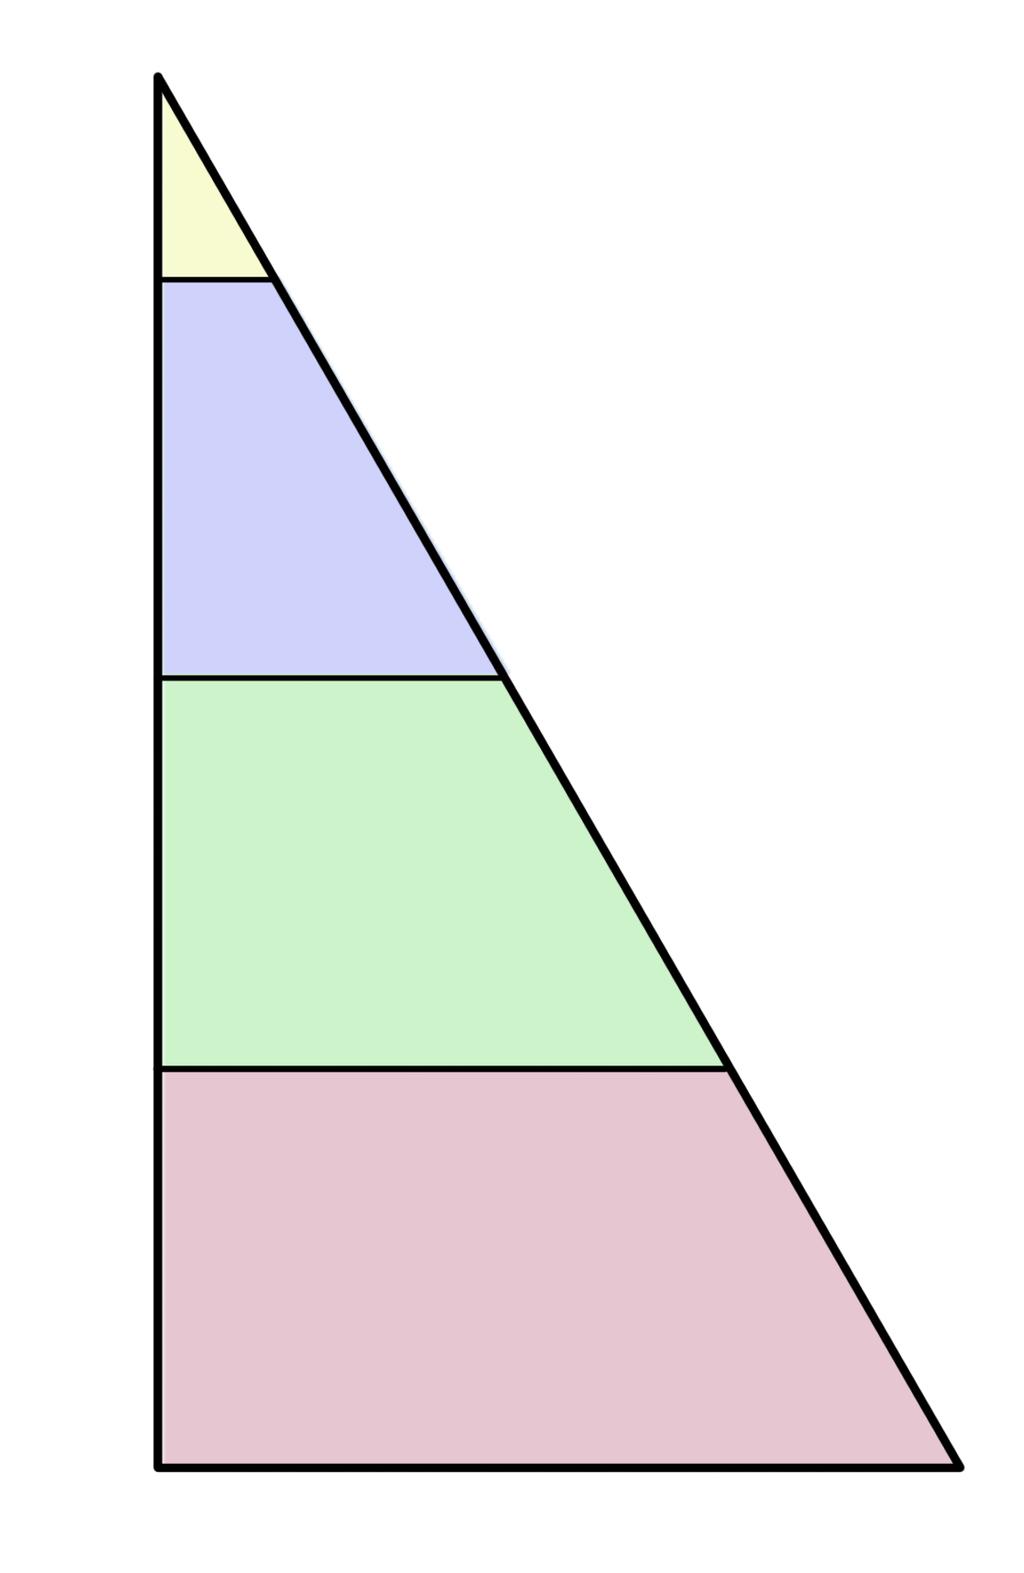 3rd section 2nd section 1st section Fig. 12. An illustration of the side triangle of the stgc prototype and its division into three trapezoidal strip groups. Fig. 10.